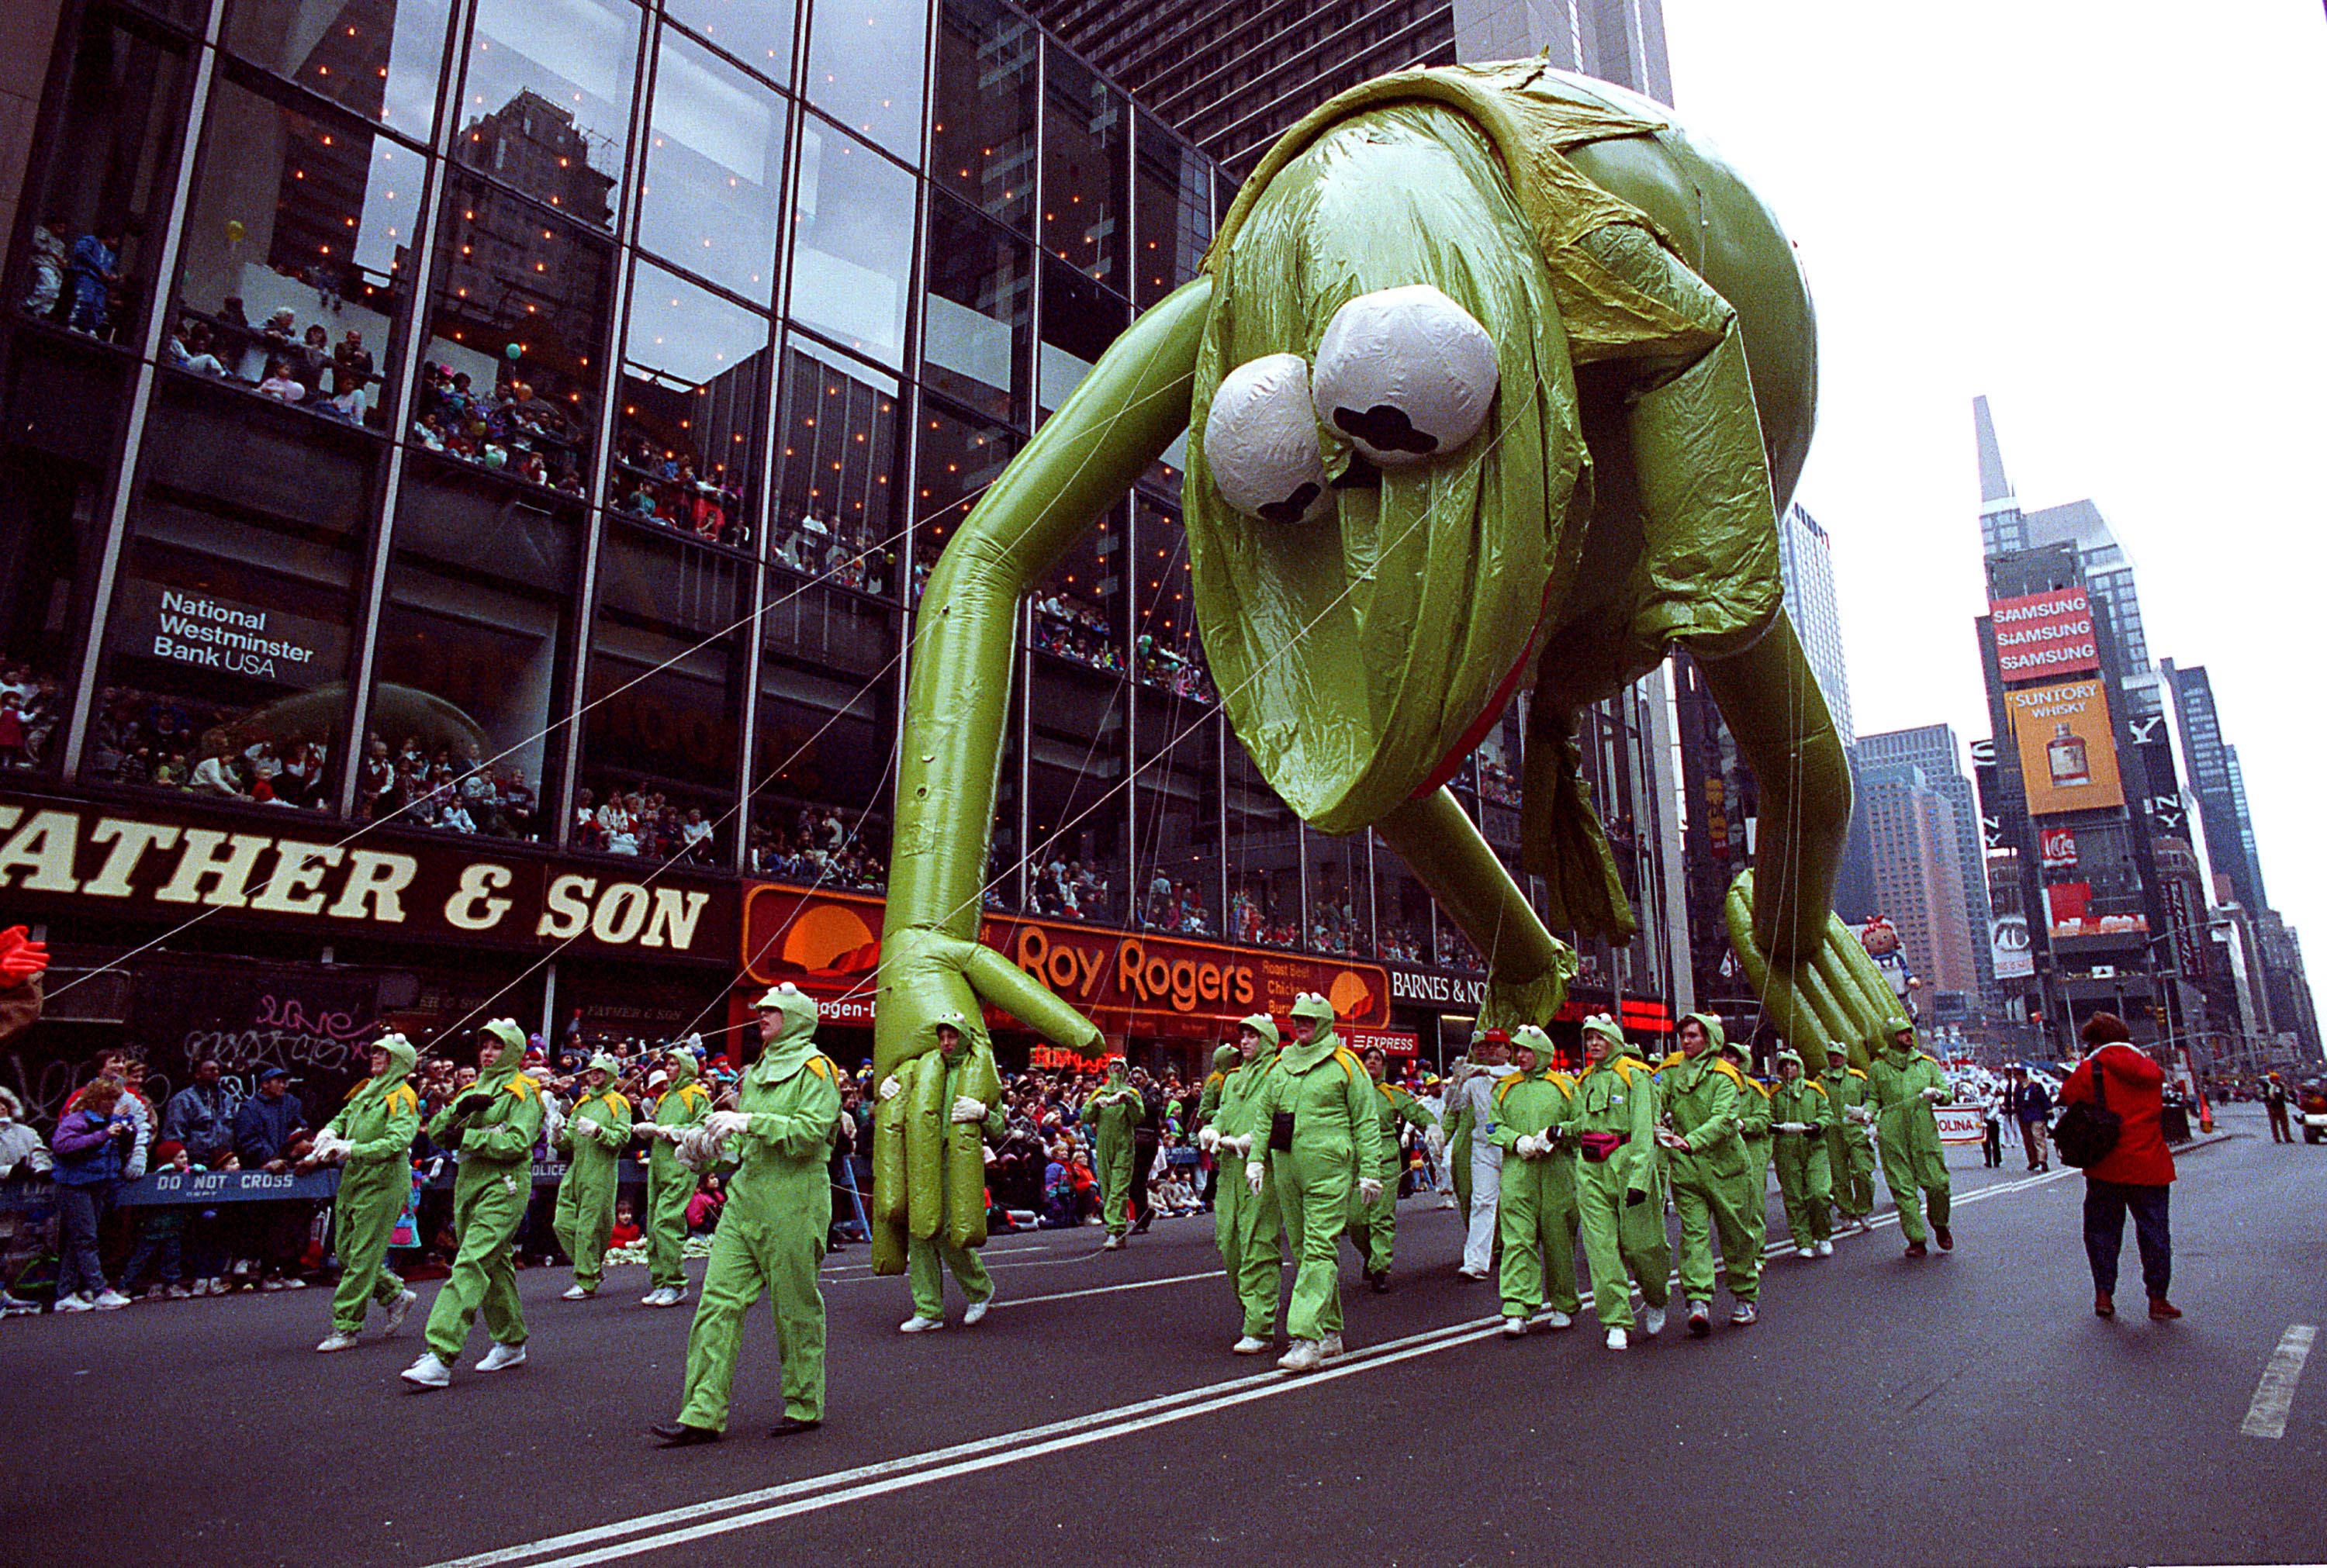 Verrassend genoeg Nauwgezet Zes Balloon mishaps at Macy's Parade: The most infamous accidents | CNN